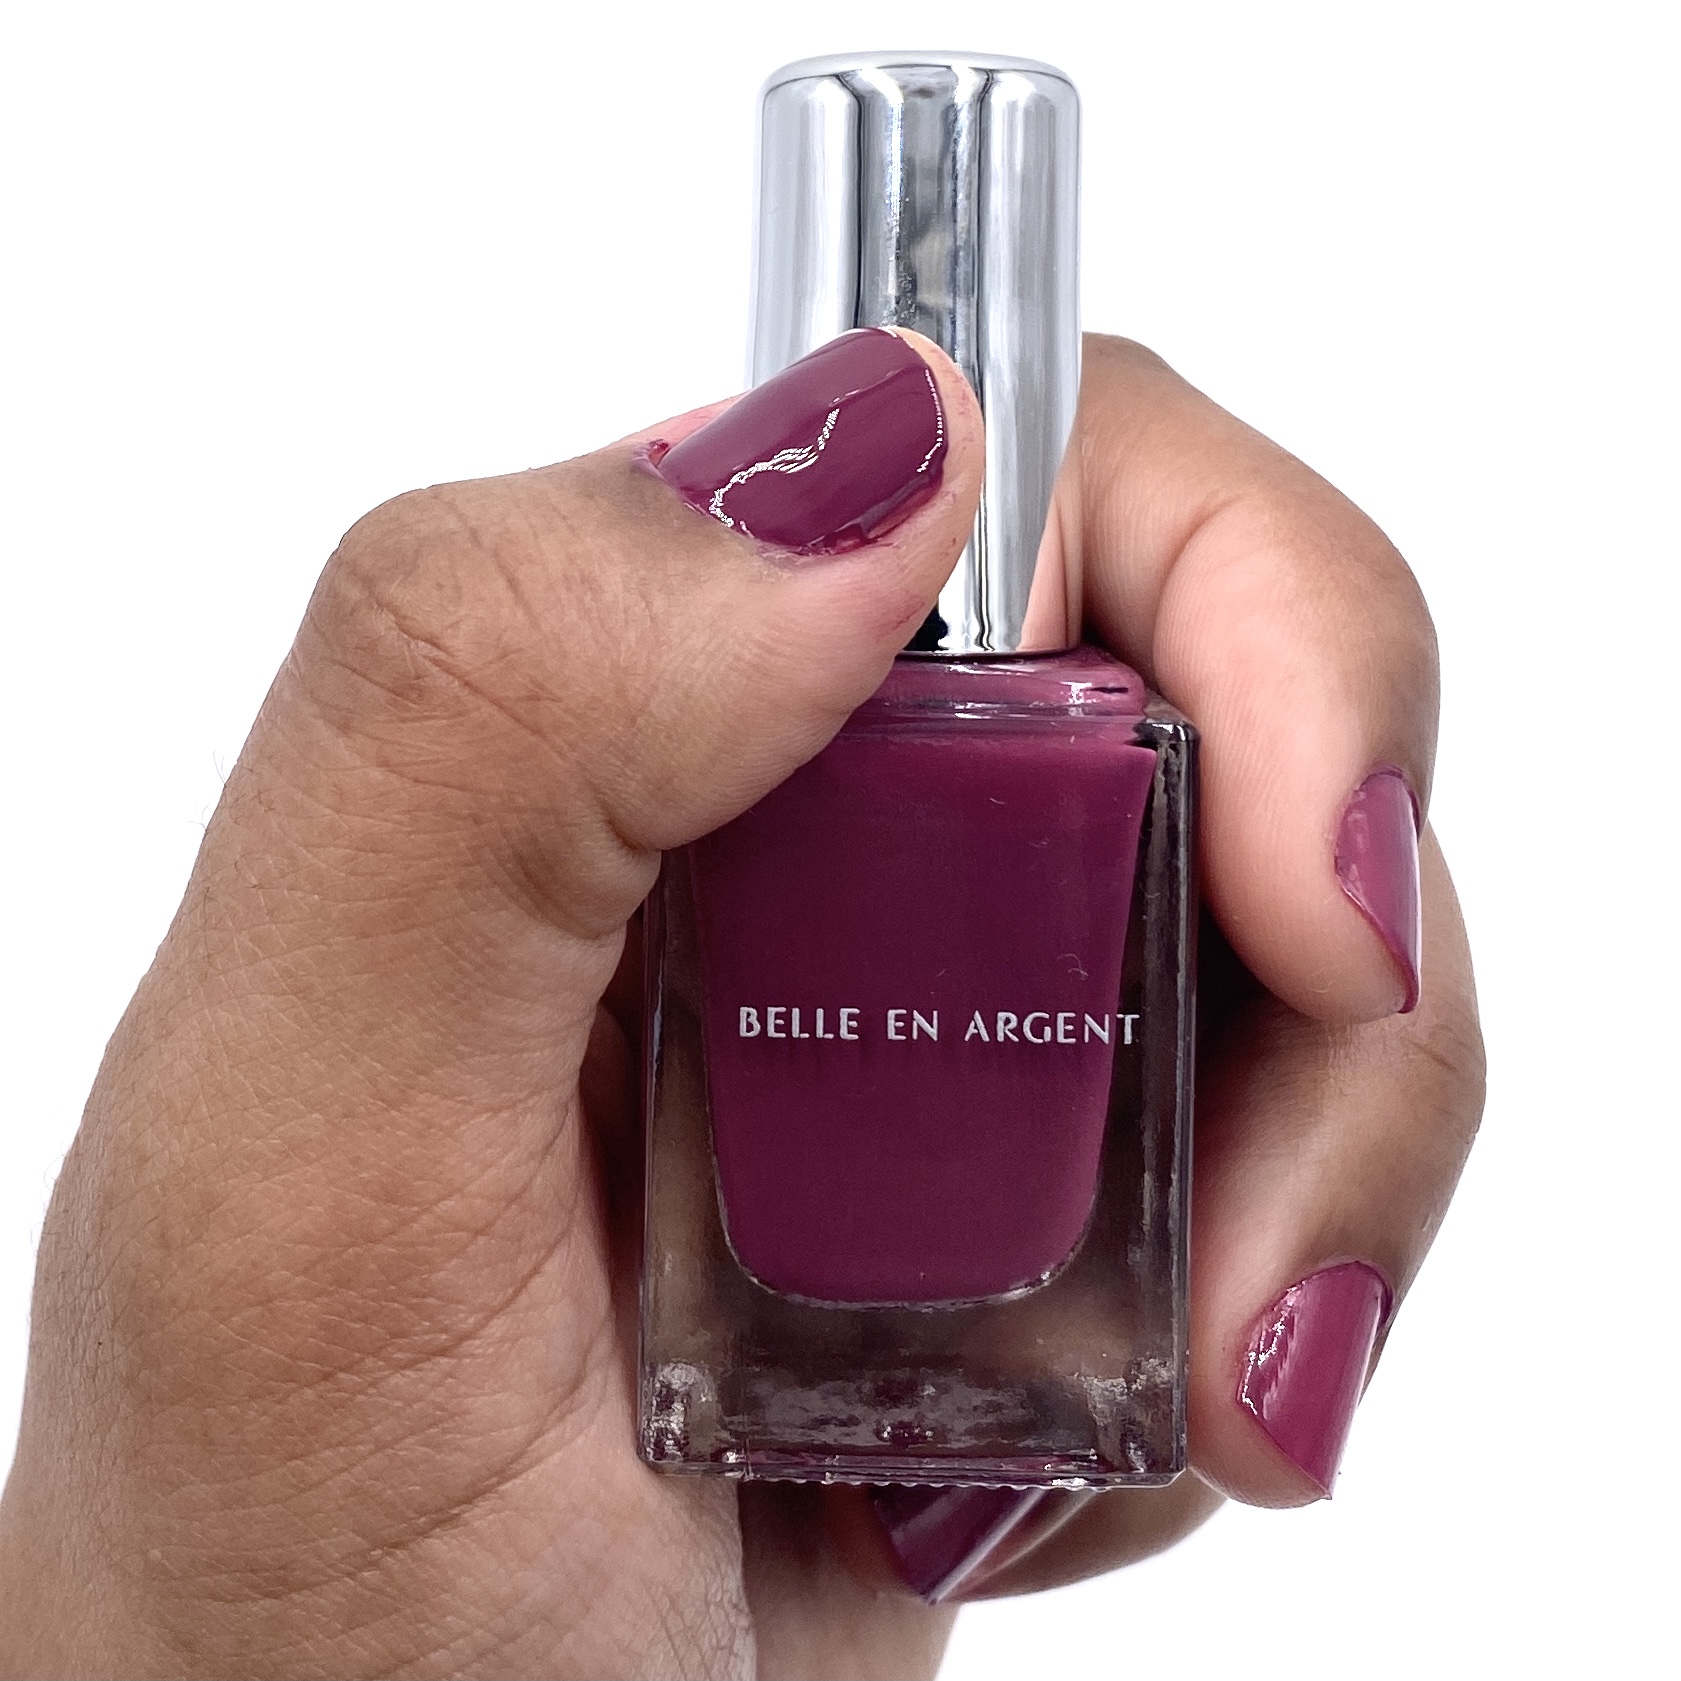 Belle en Argent 8 Free Nail Polish in Like a Grape Swatch for Ipsy Glam Bag March 2021